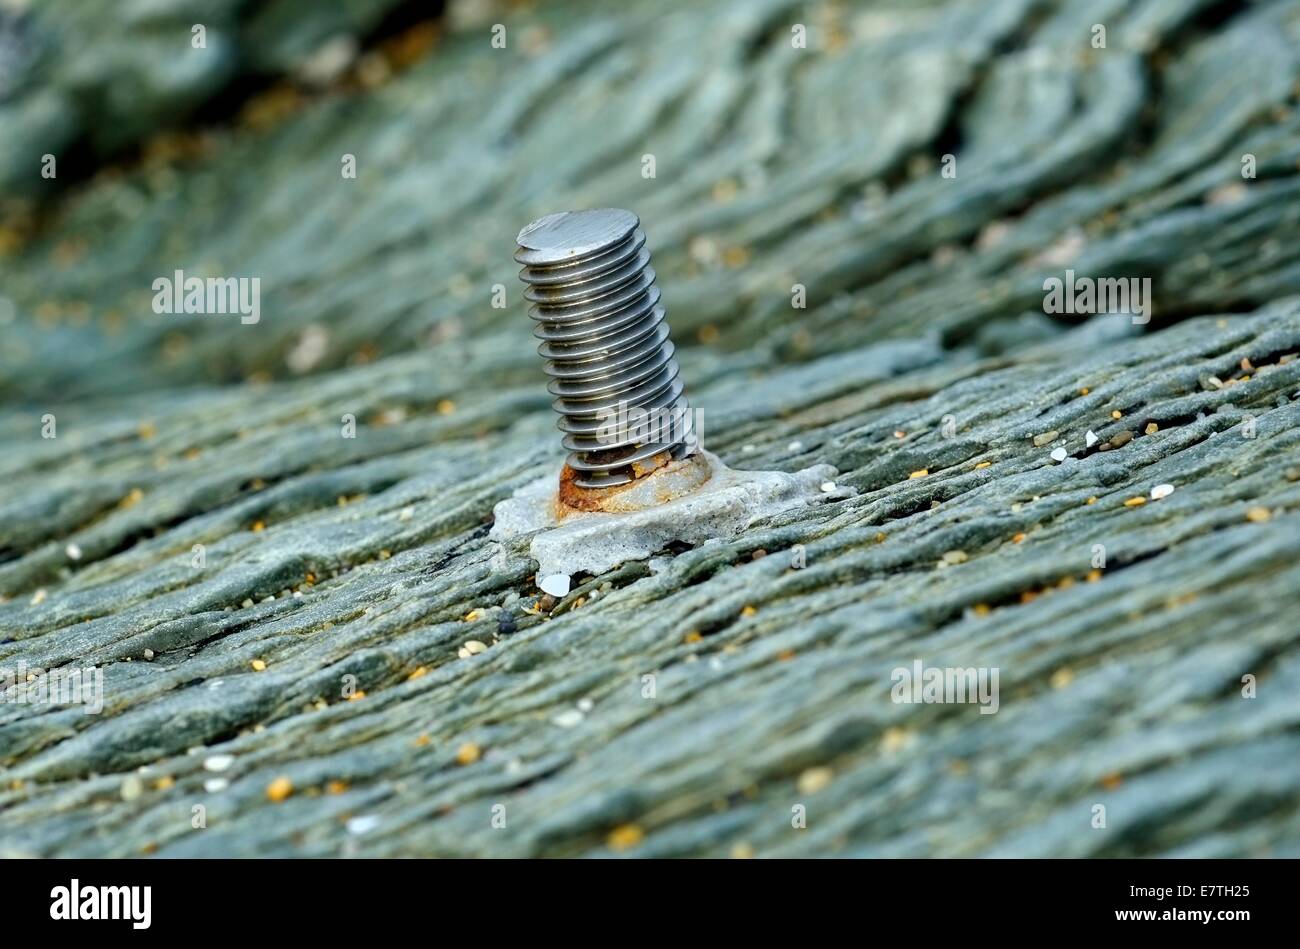 A bolt cemented into the rock face england uk Stock Photo